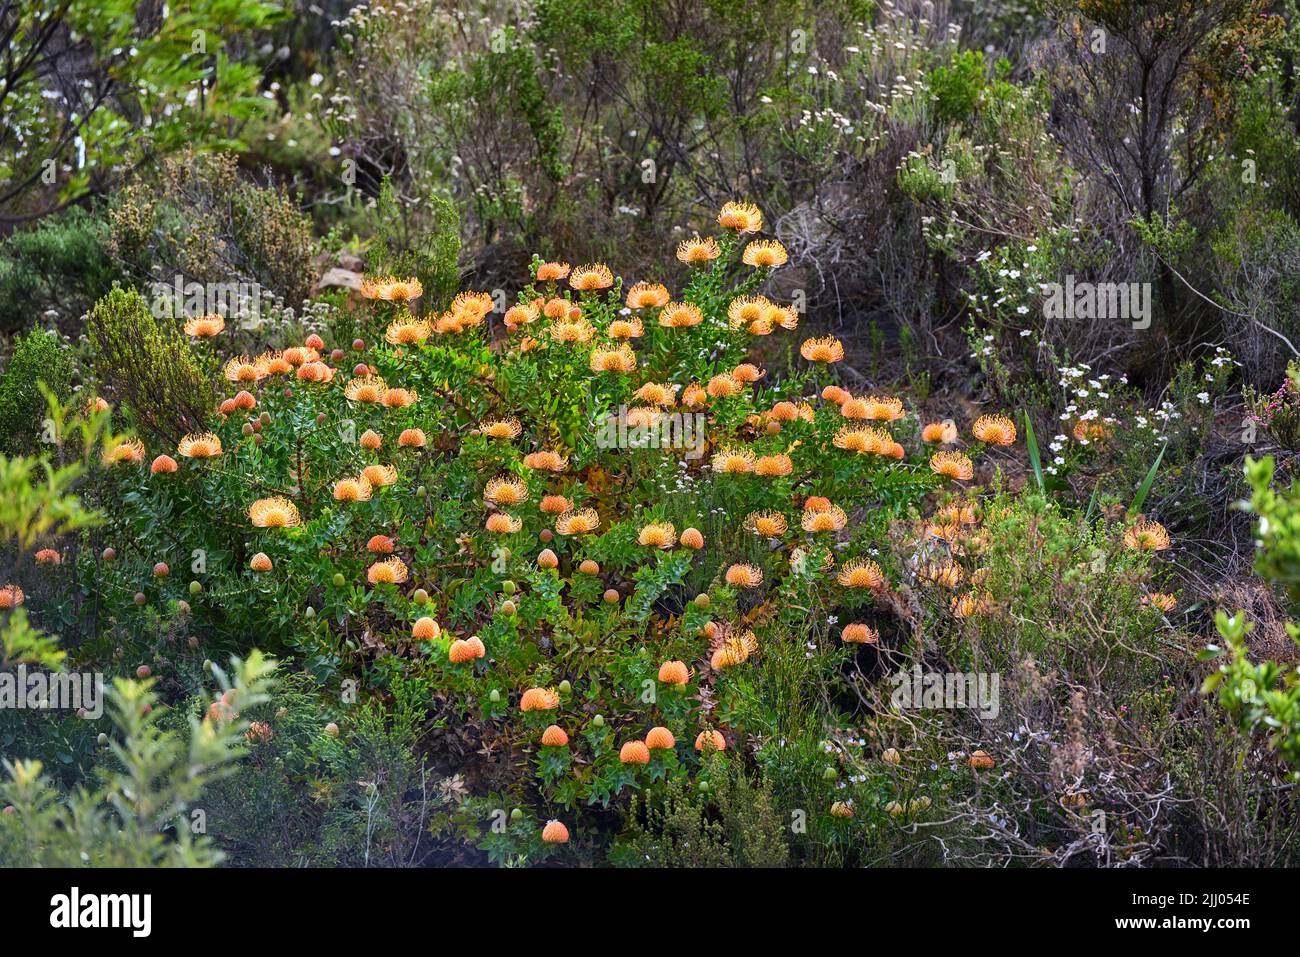 Above shot of orange protea flowers growing outside in their natural habitat. Plant life and vegetation growing and thriving on a mountainside in a Stock Photo